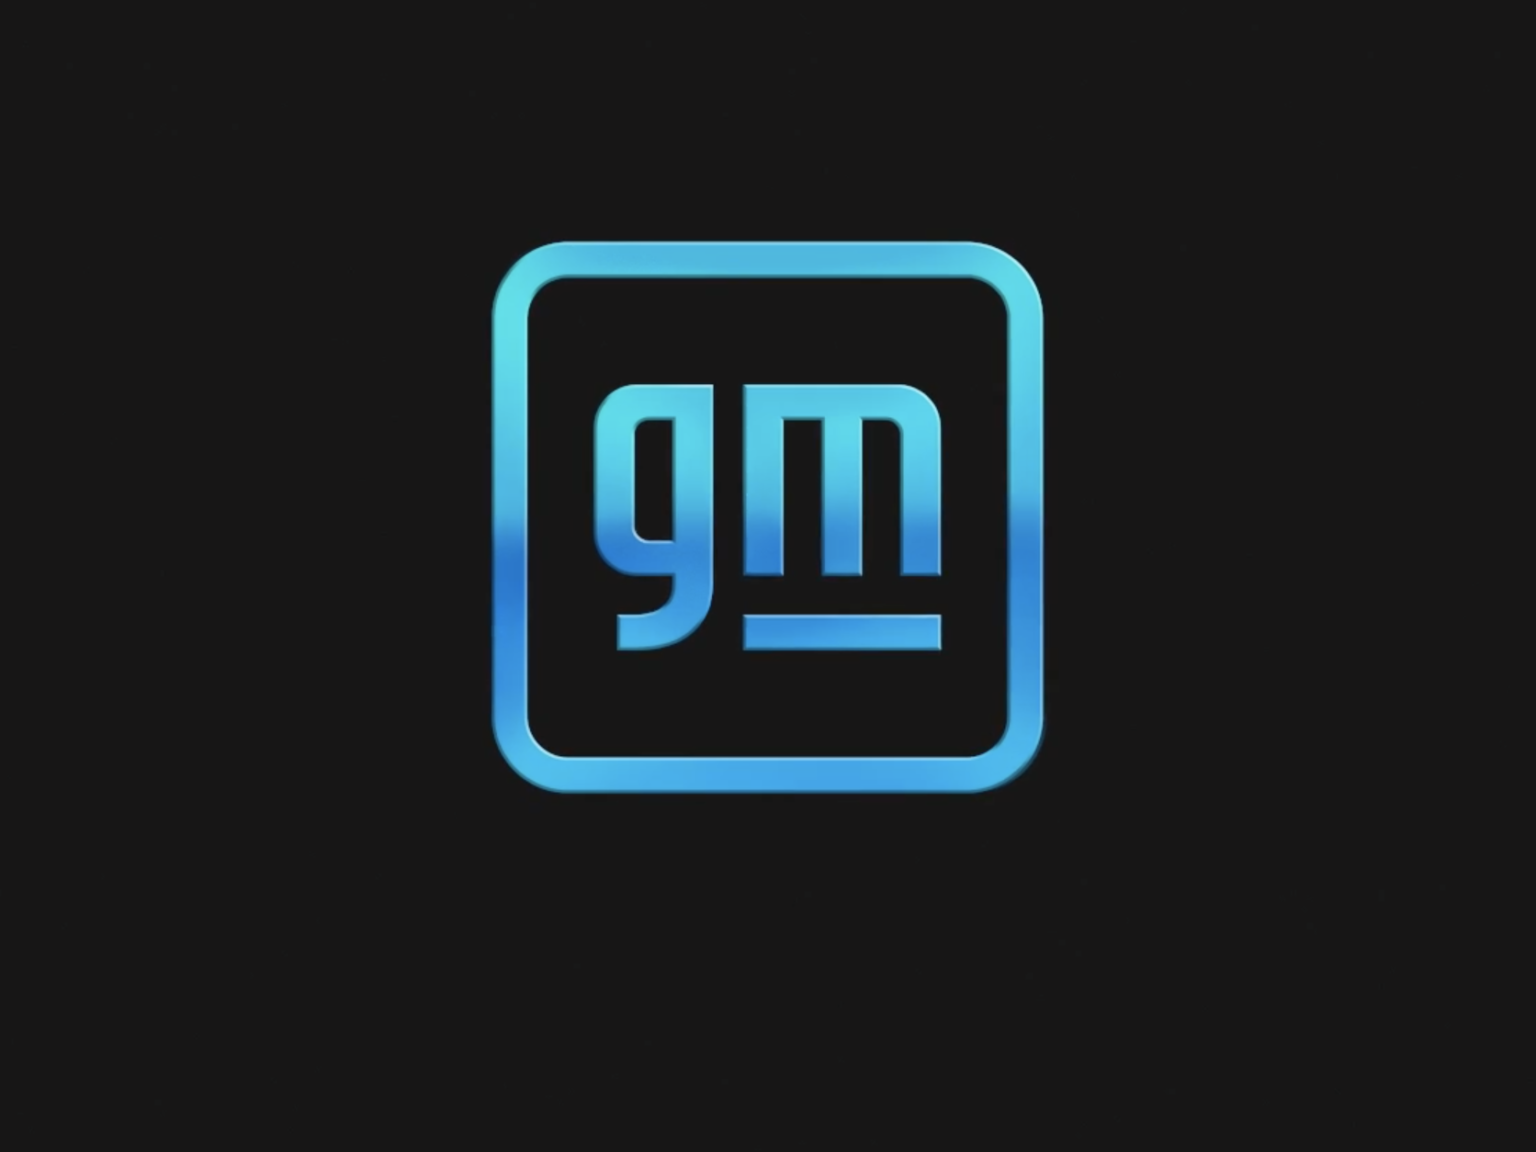 General Motors revealed a new logo today.